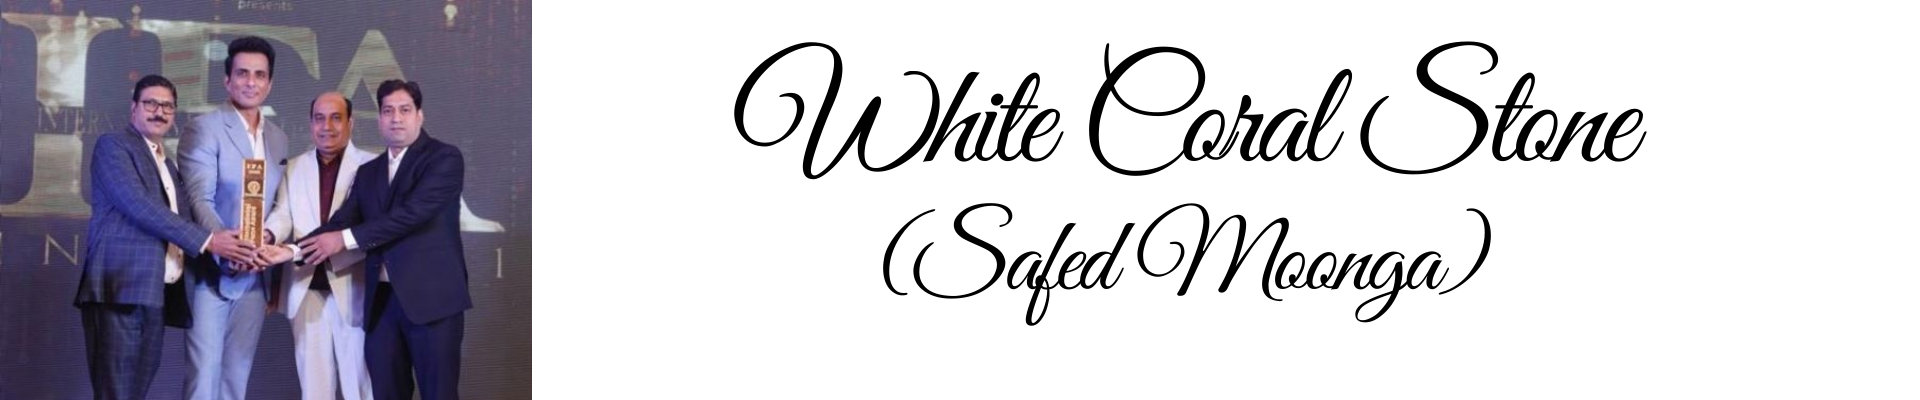 White Coral Stone | Safed Moonga Online in India